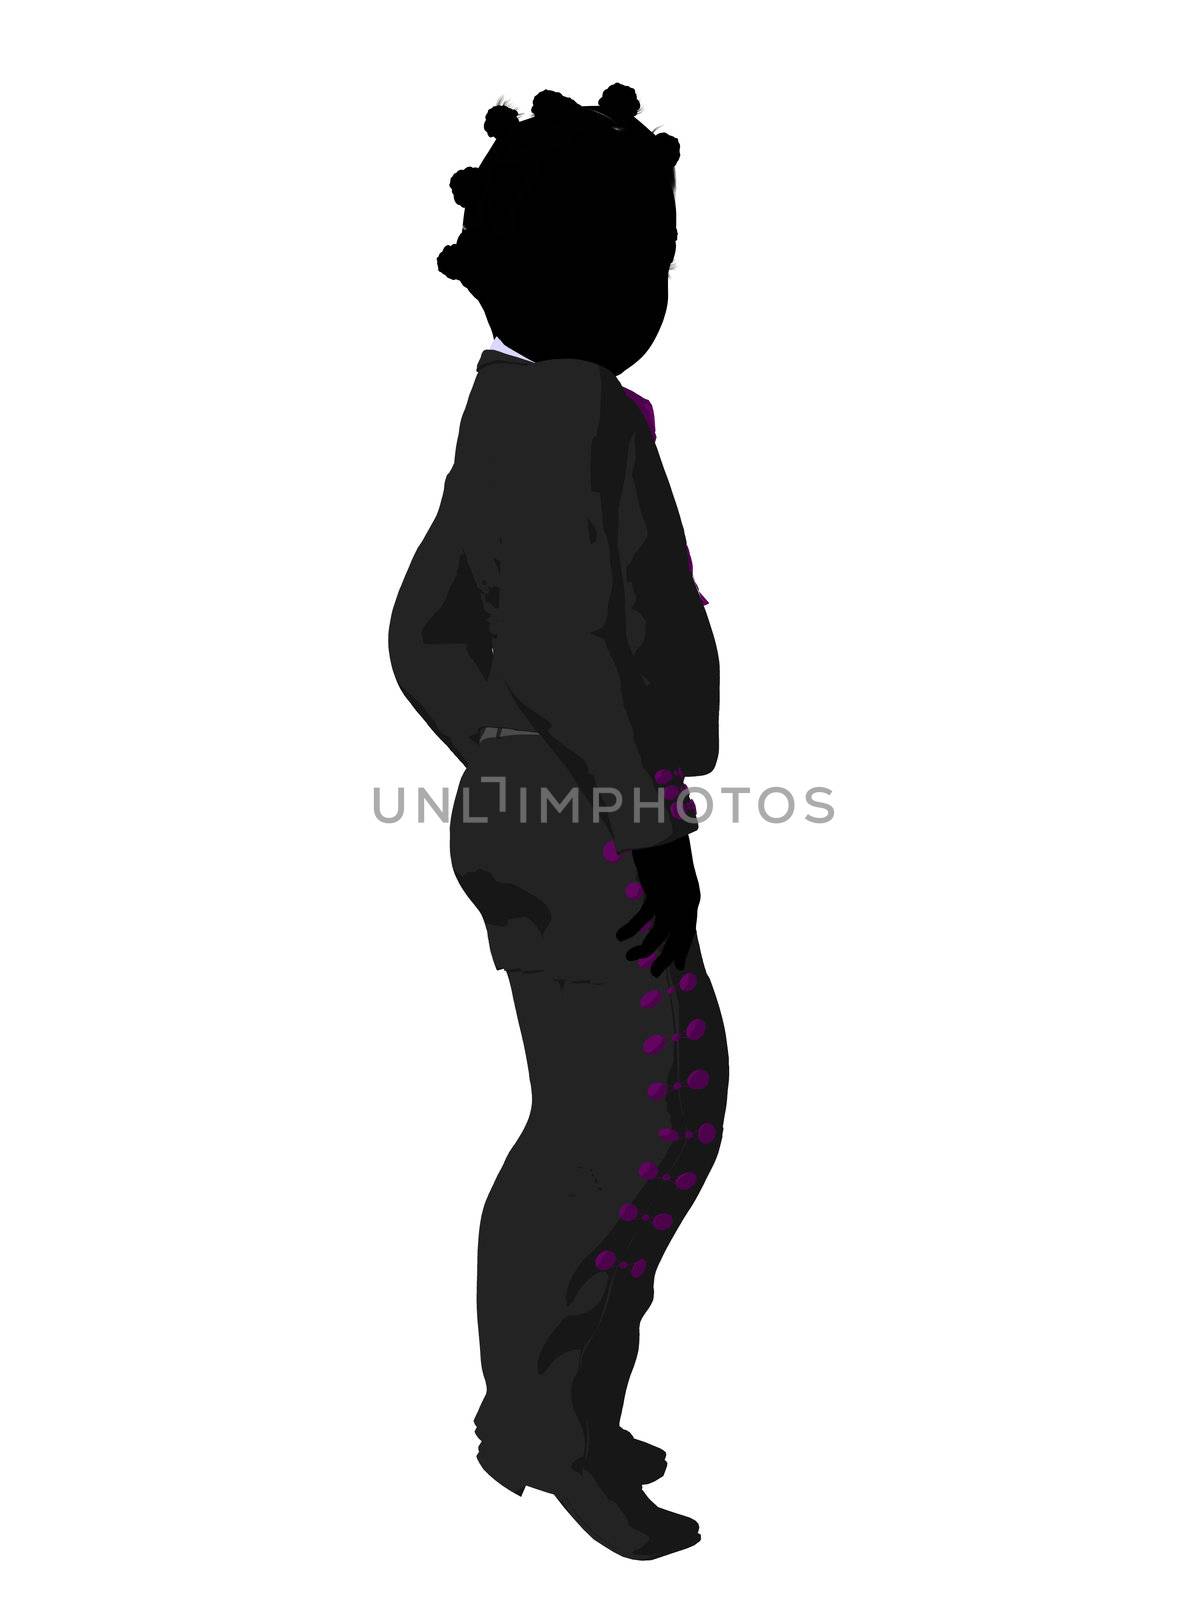 African American Girl Mariachi Silhouette Illustration by kathygold